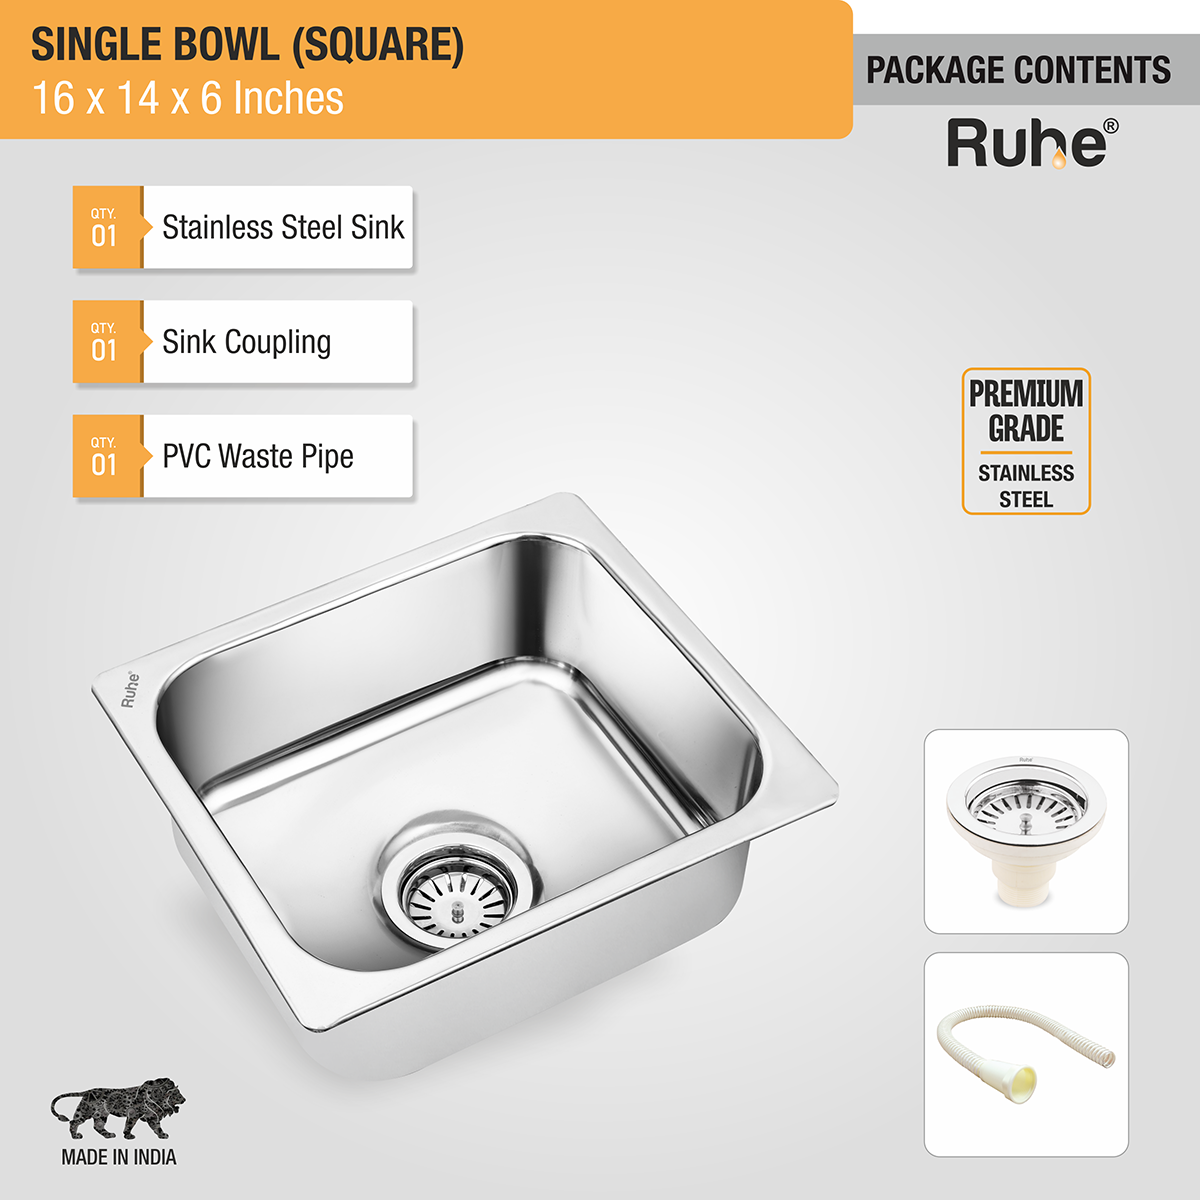 Square Single Bowl Kitchen Sink (16 x 14 x 6 inches) with sink coupling and pvc waste pipe